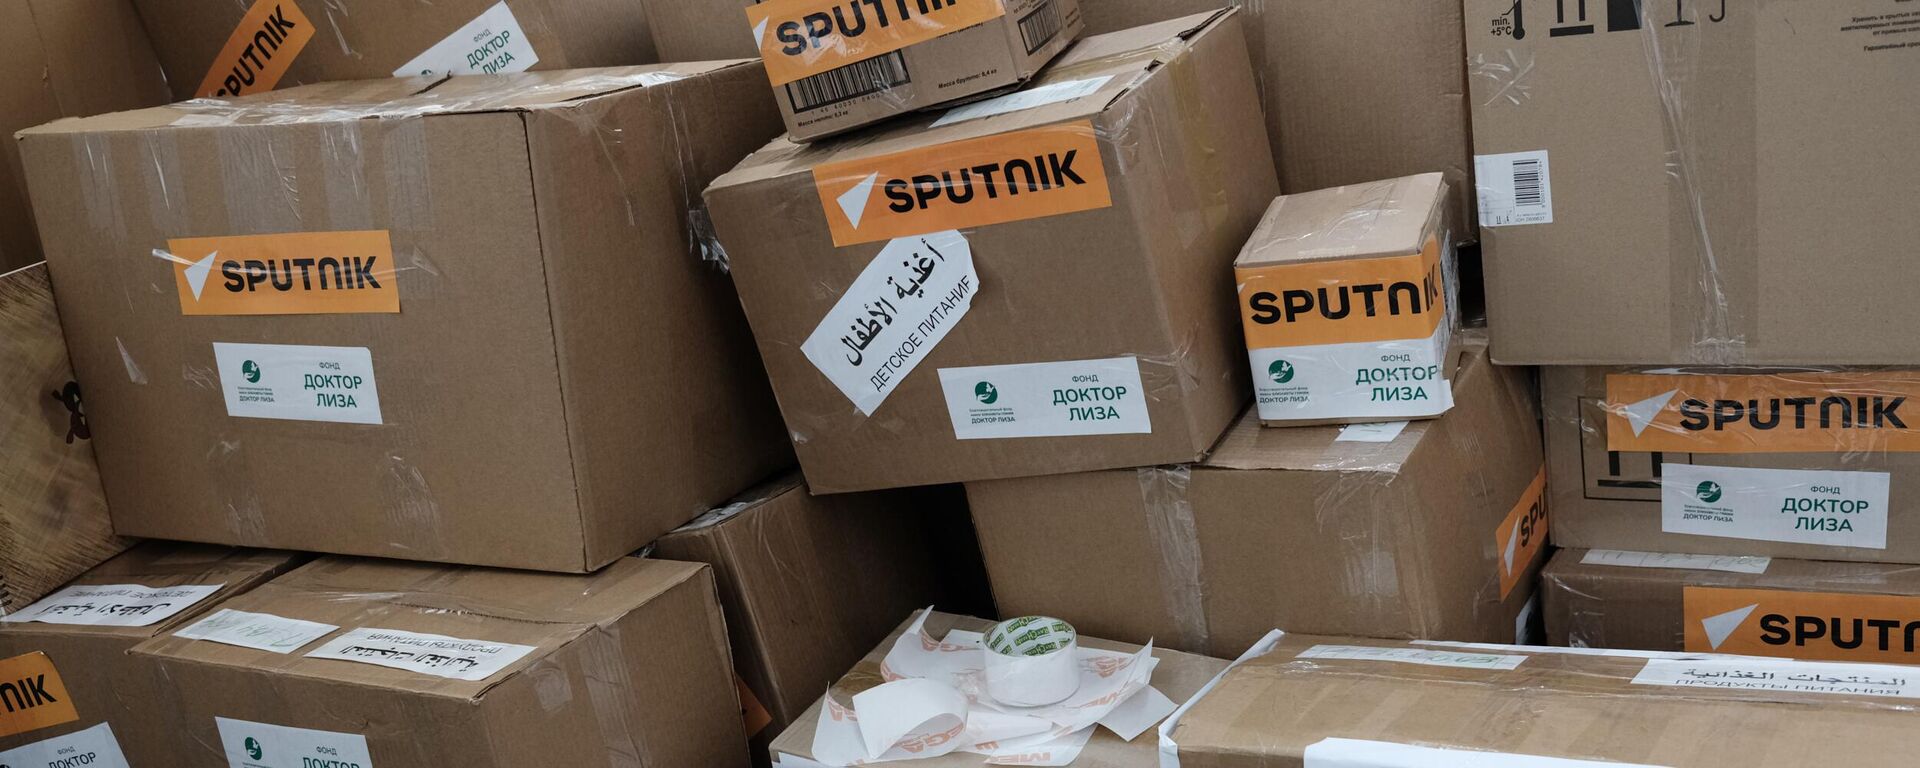 Sputnik donates over 3 tons of humanitarian aid to Syrian families affected by the earthquake - Sputnik International, 1920, 20.02.2023